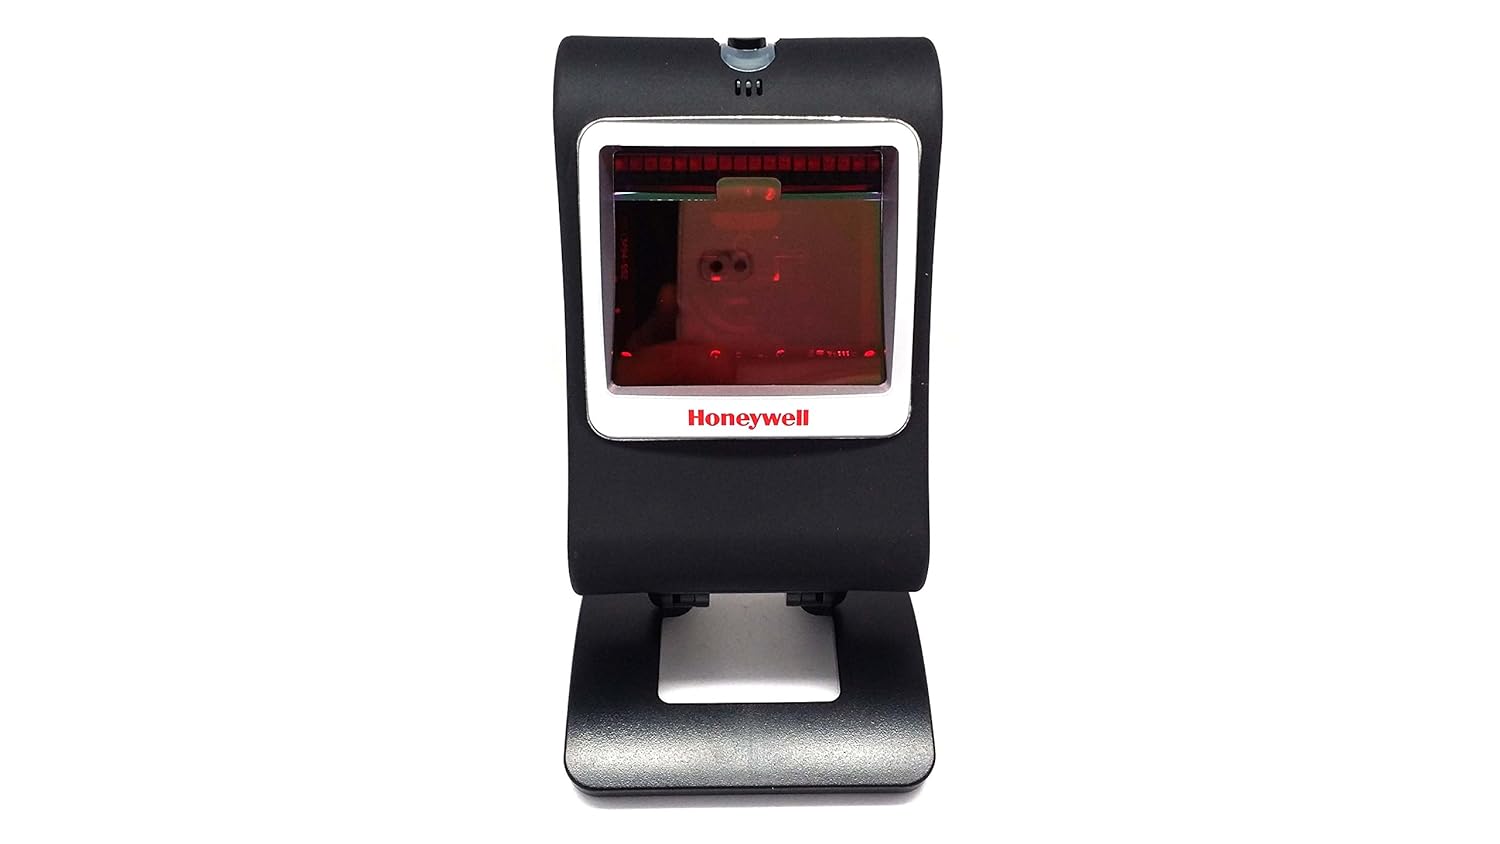 Honeywell/Genesis Genesis 7580g Presentation Barcode Scanner (2D, 1D and Mobile Phone) with USB Cable (CBL-500-300-S00, Type A, 3m/9.8